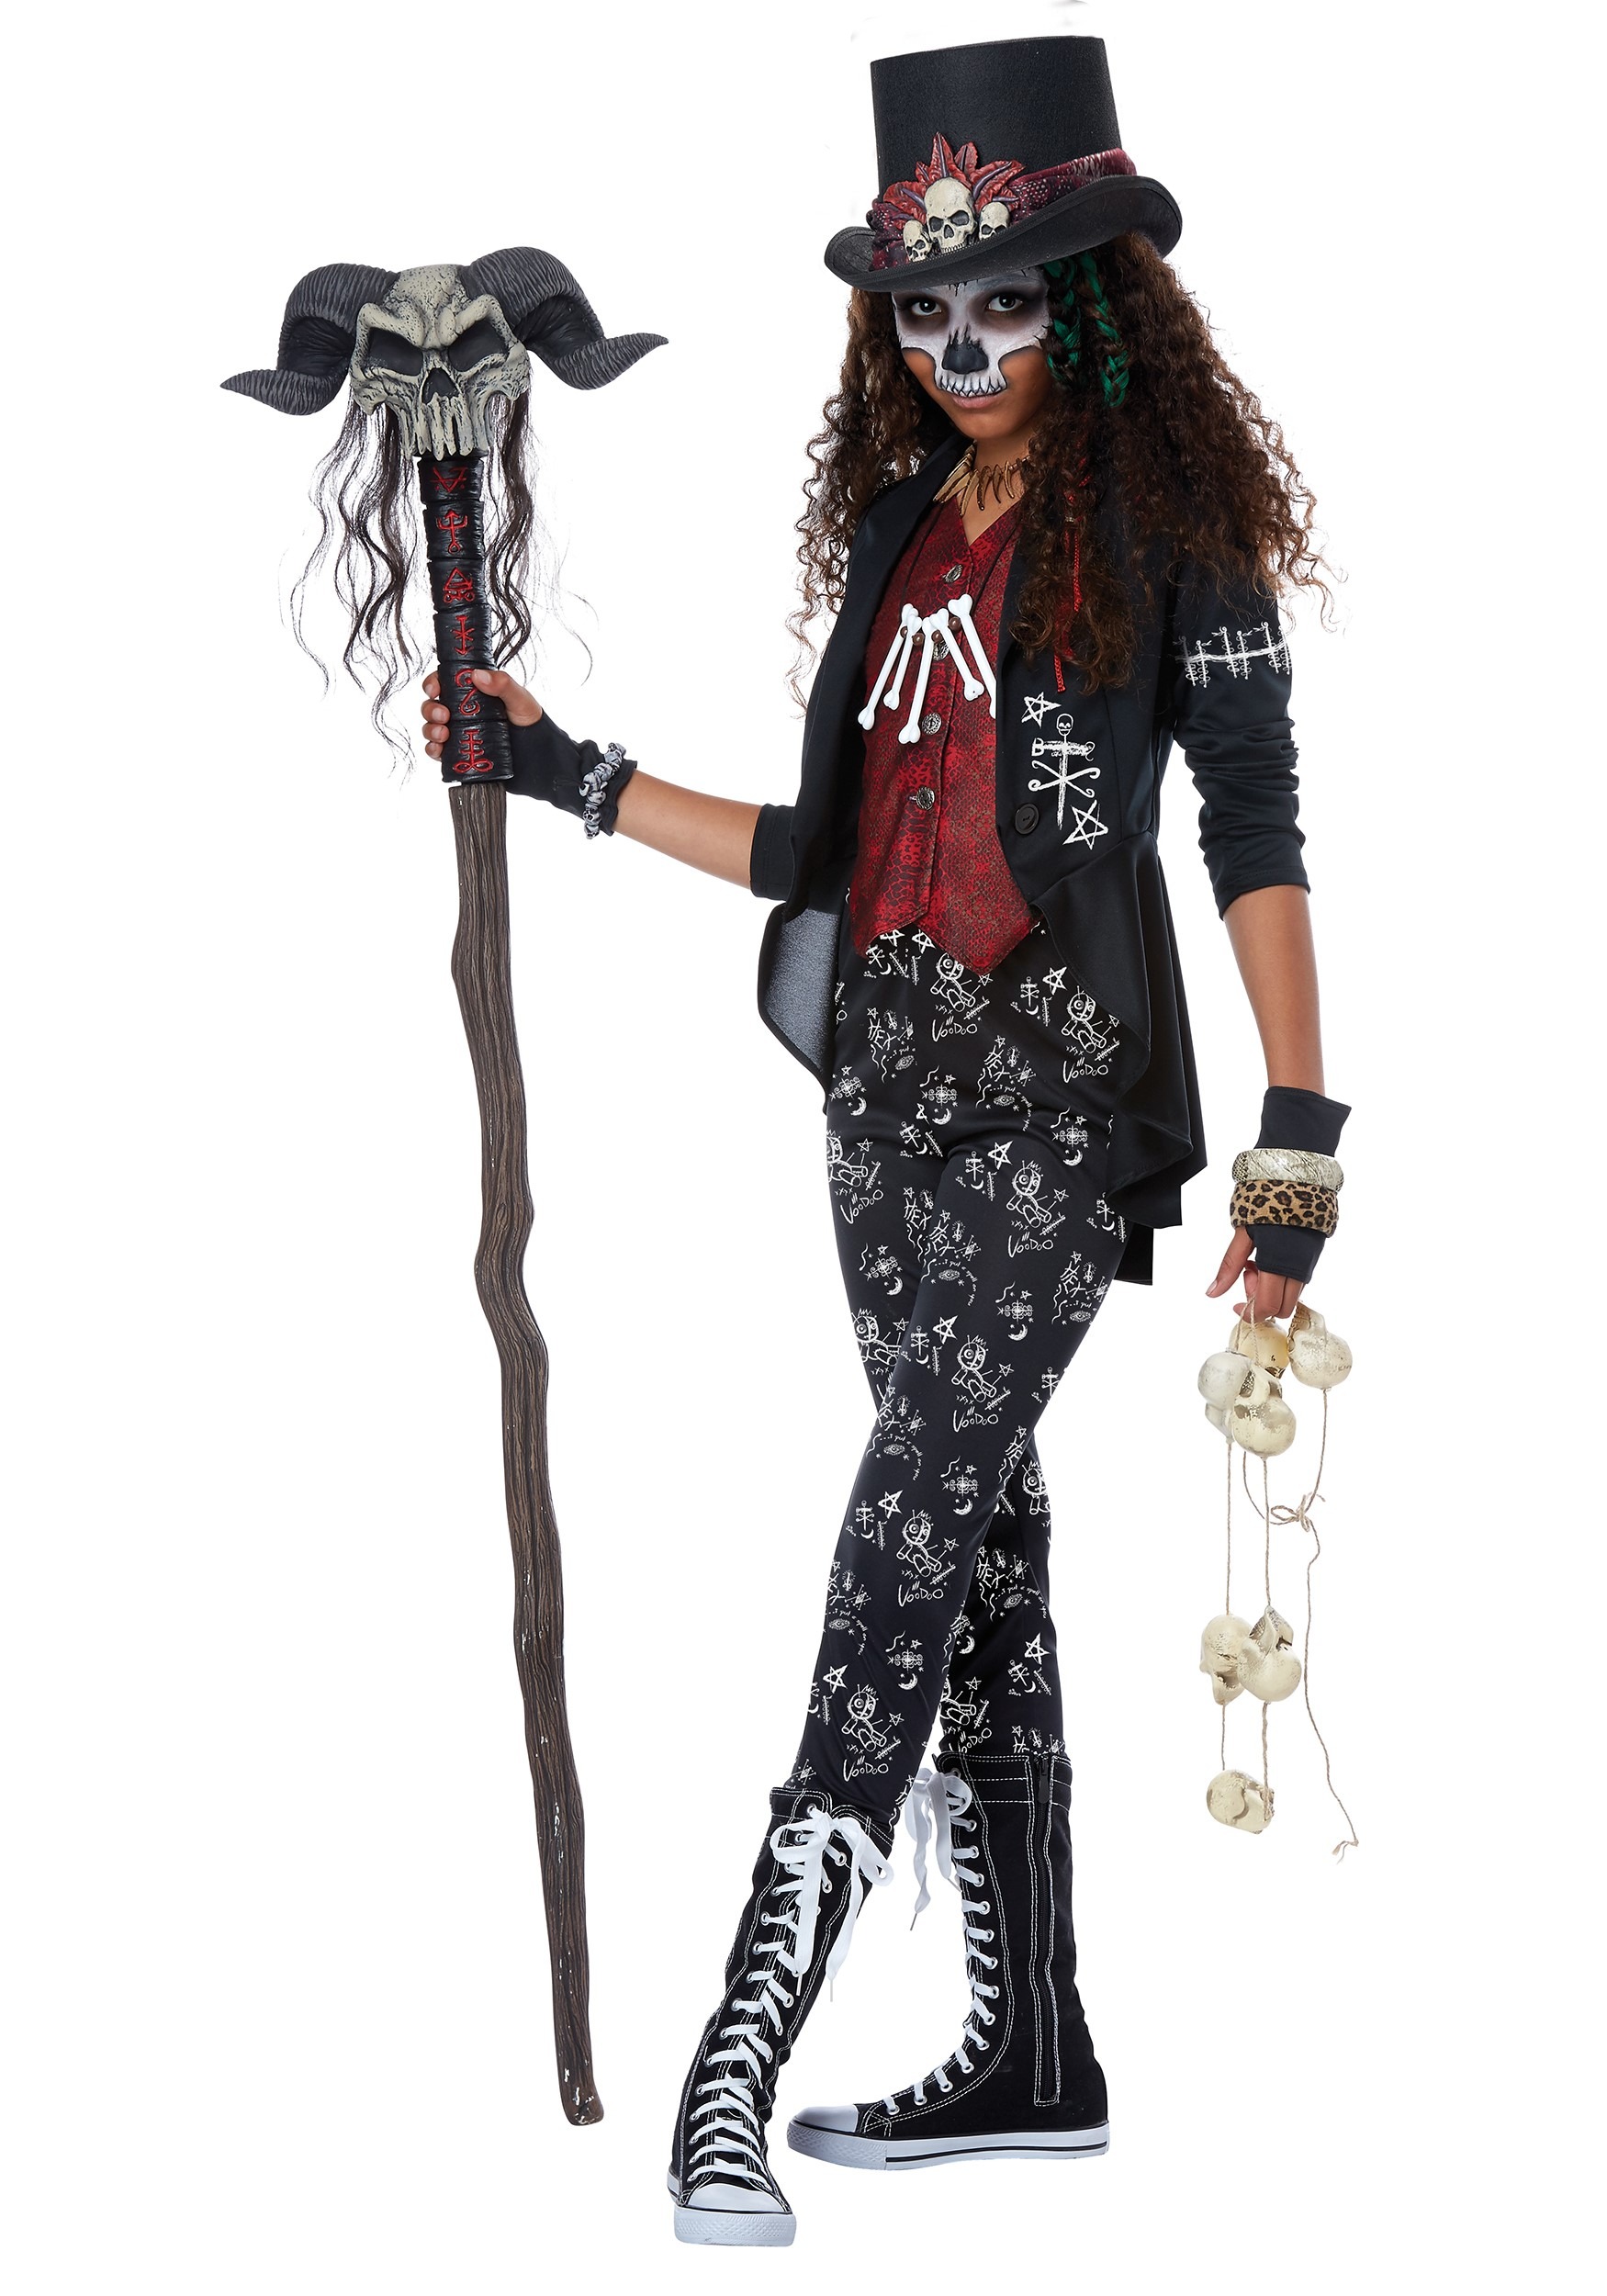 Photos - Fancy Dress California Costume Collection Voodoo Charm Girl's Costume Black/Red 